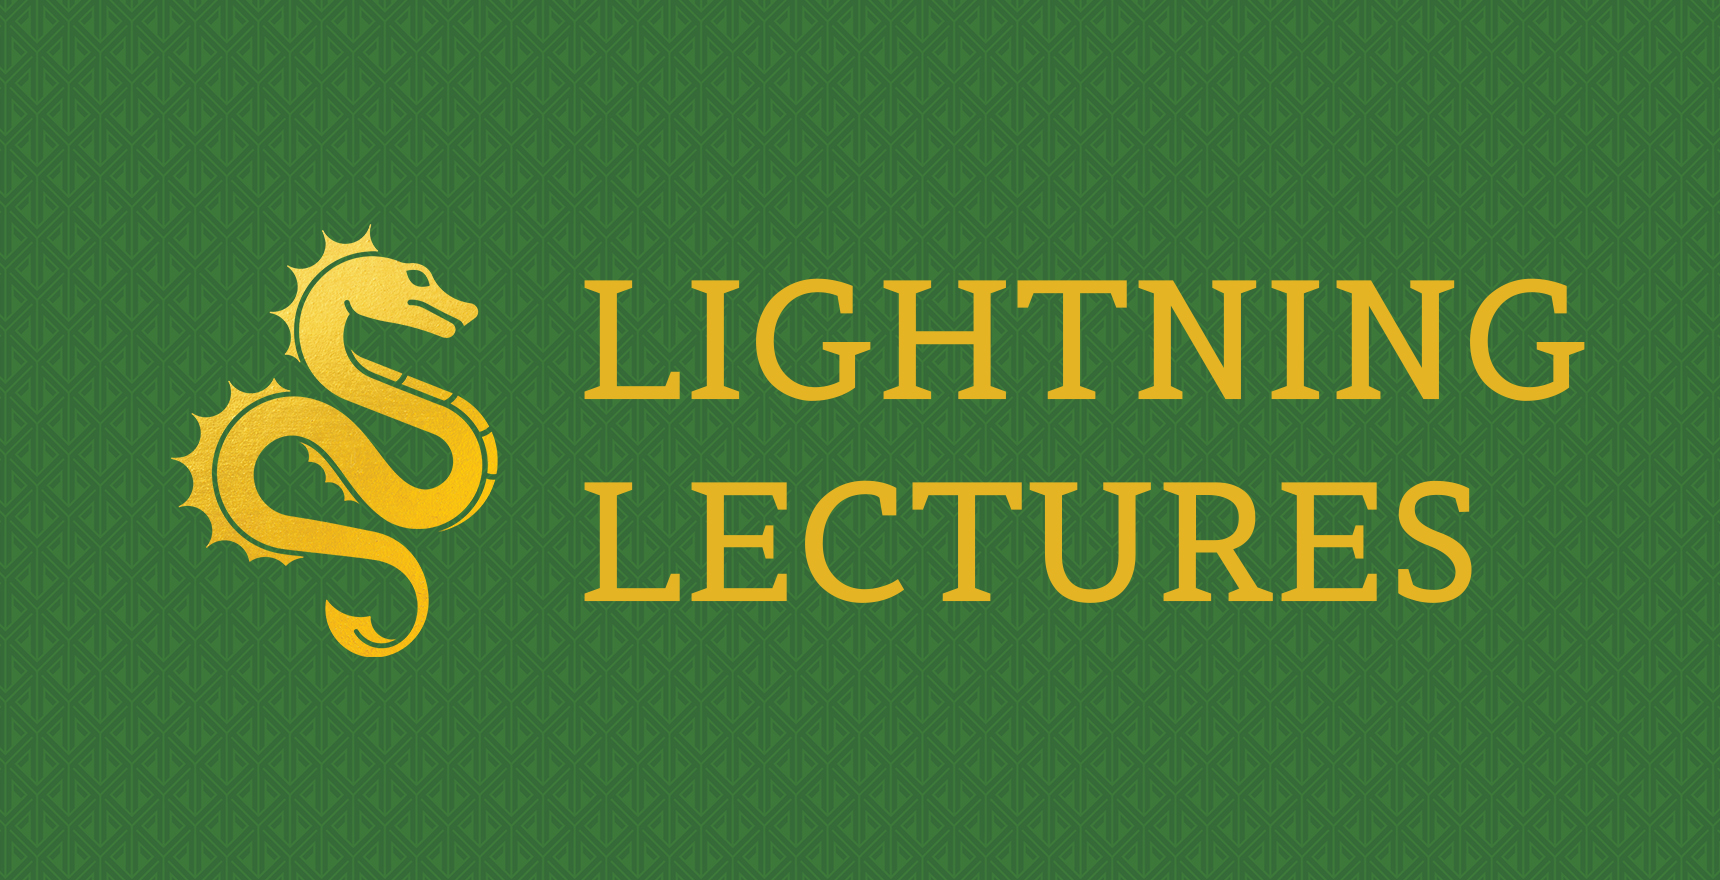 lighting lectures graphic